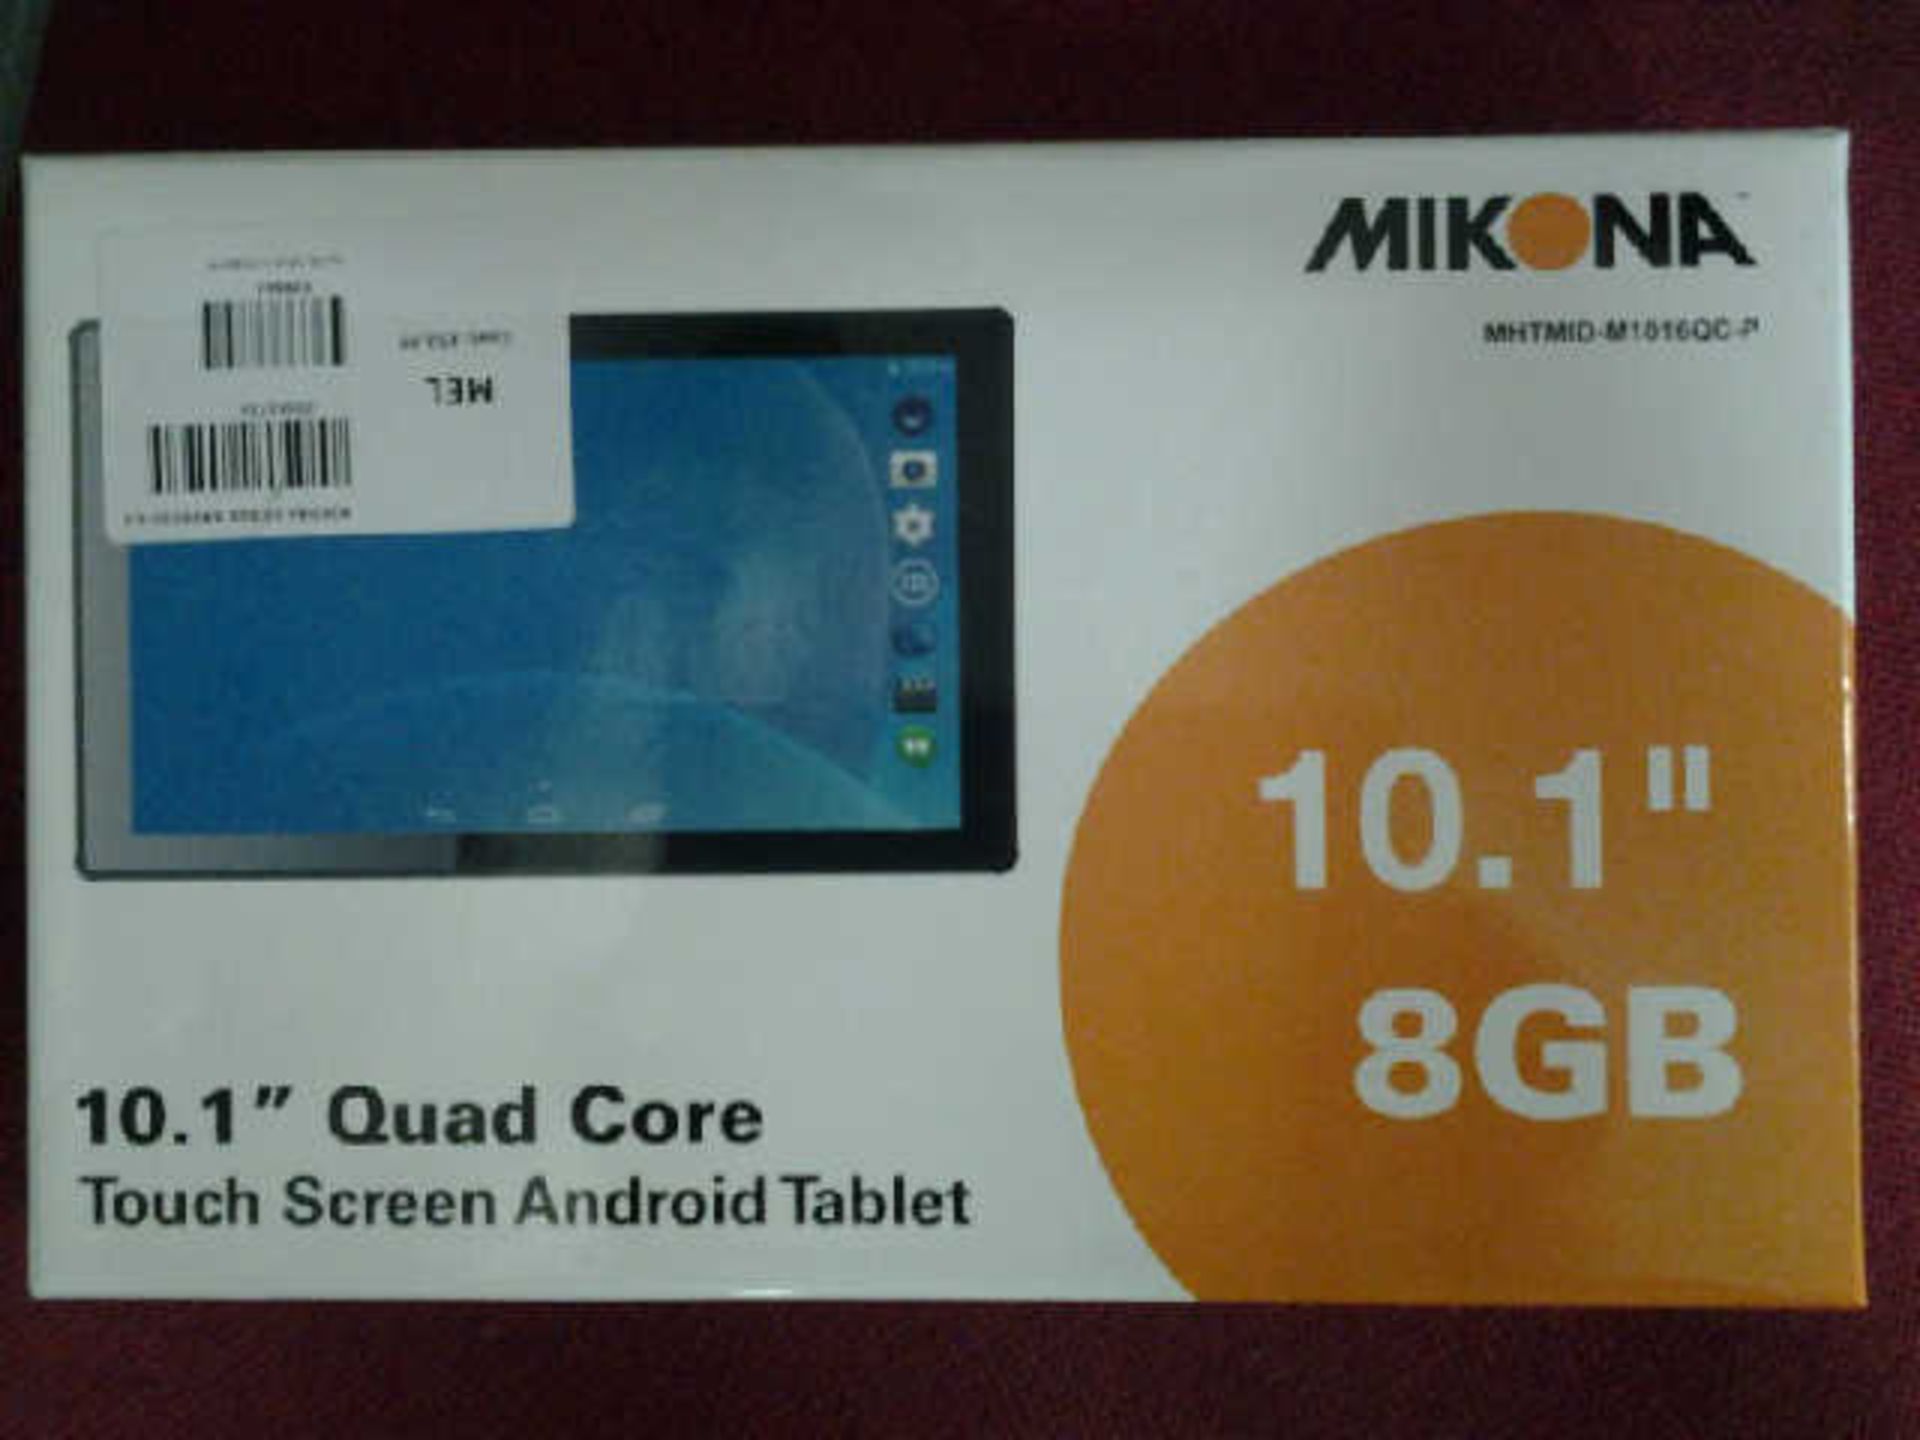 2 BOXED MIKONA 10.1" 8GB TOUCH-SCREEN ANDROID TABLETS.